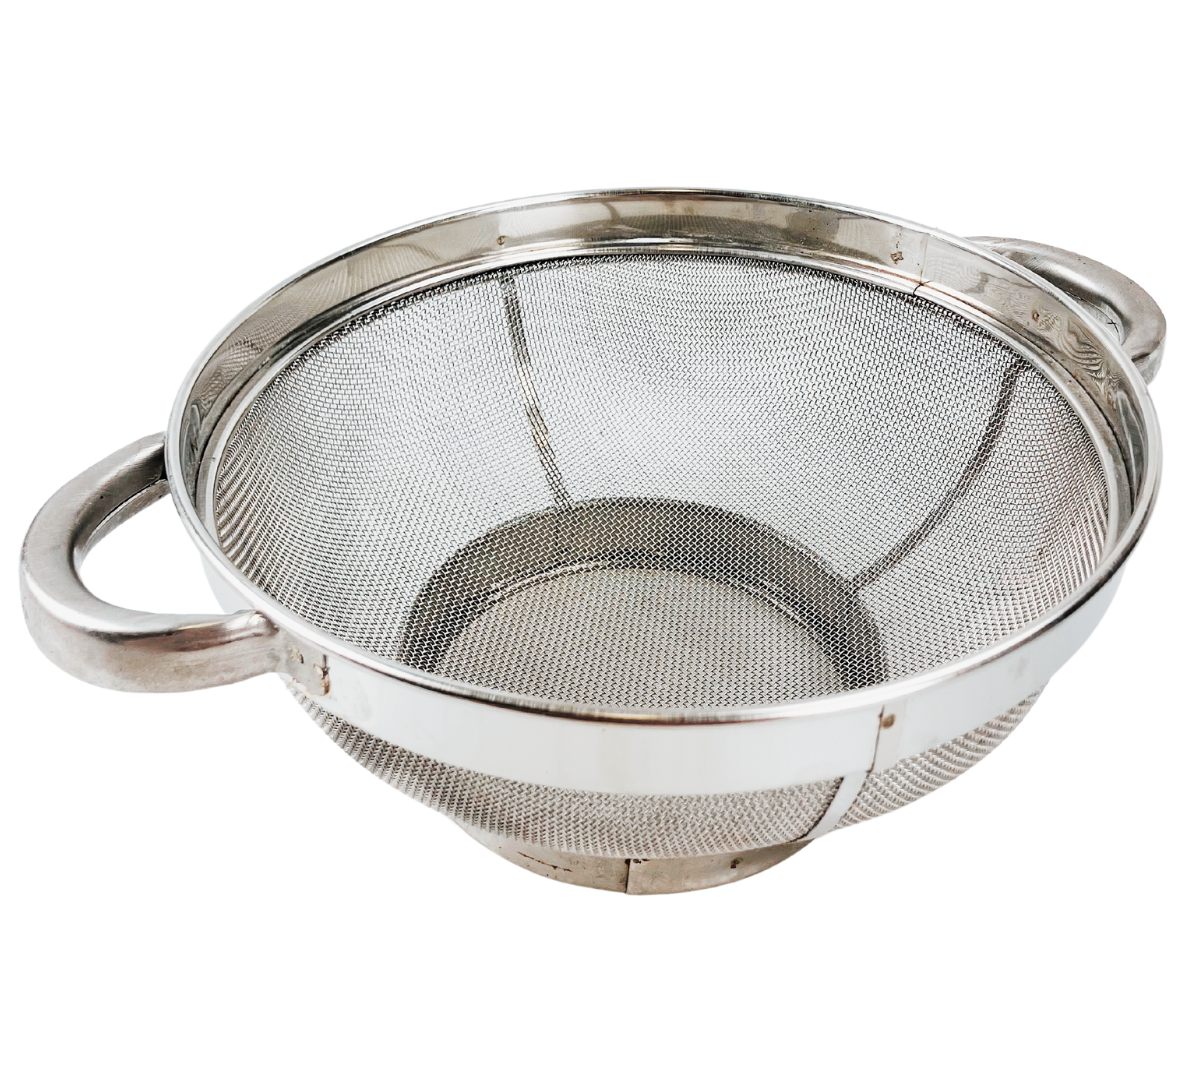 KITCHEN DIVA 8" Stainless Steel Mesh Colander Strainer (Approx. 3 Quarts) | Great for Straining all Kinds of Food | Drain, Rinse or Steam